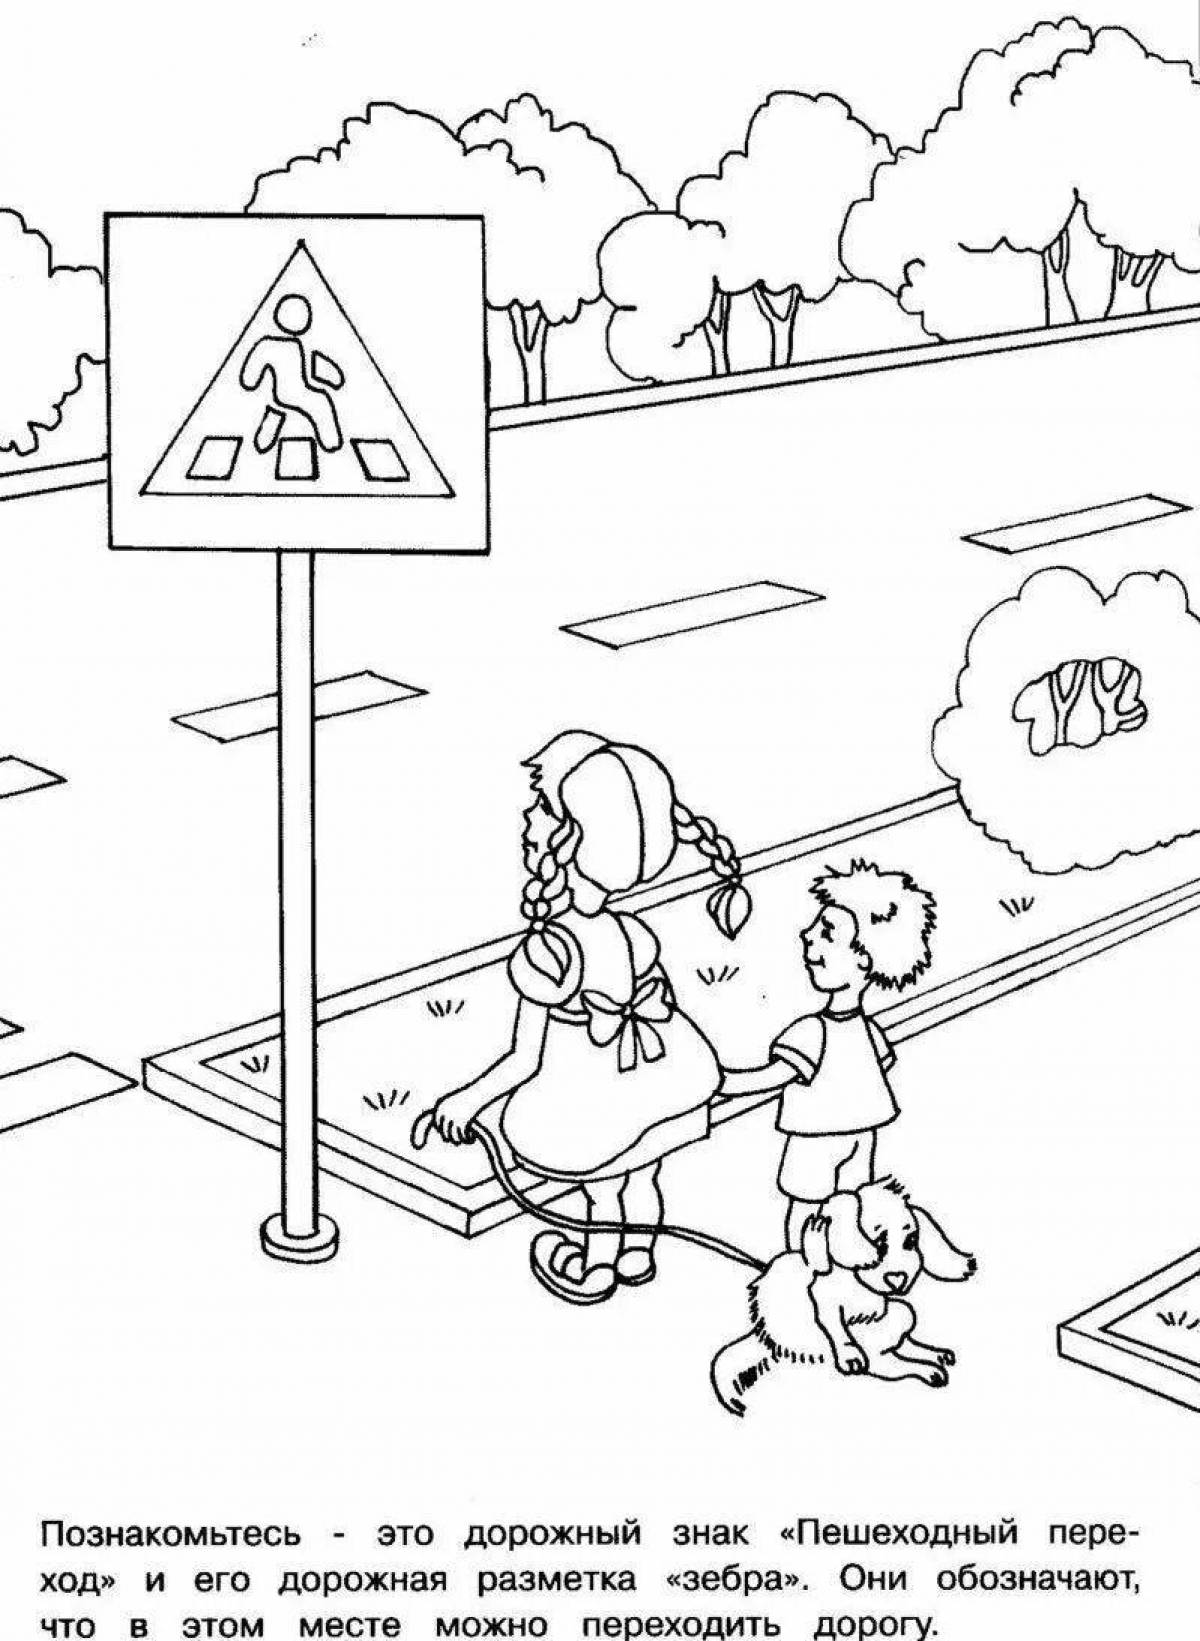 Traffic safety education coloring book